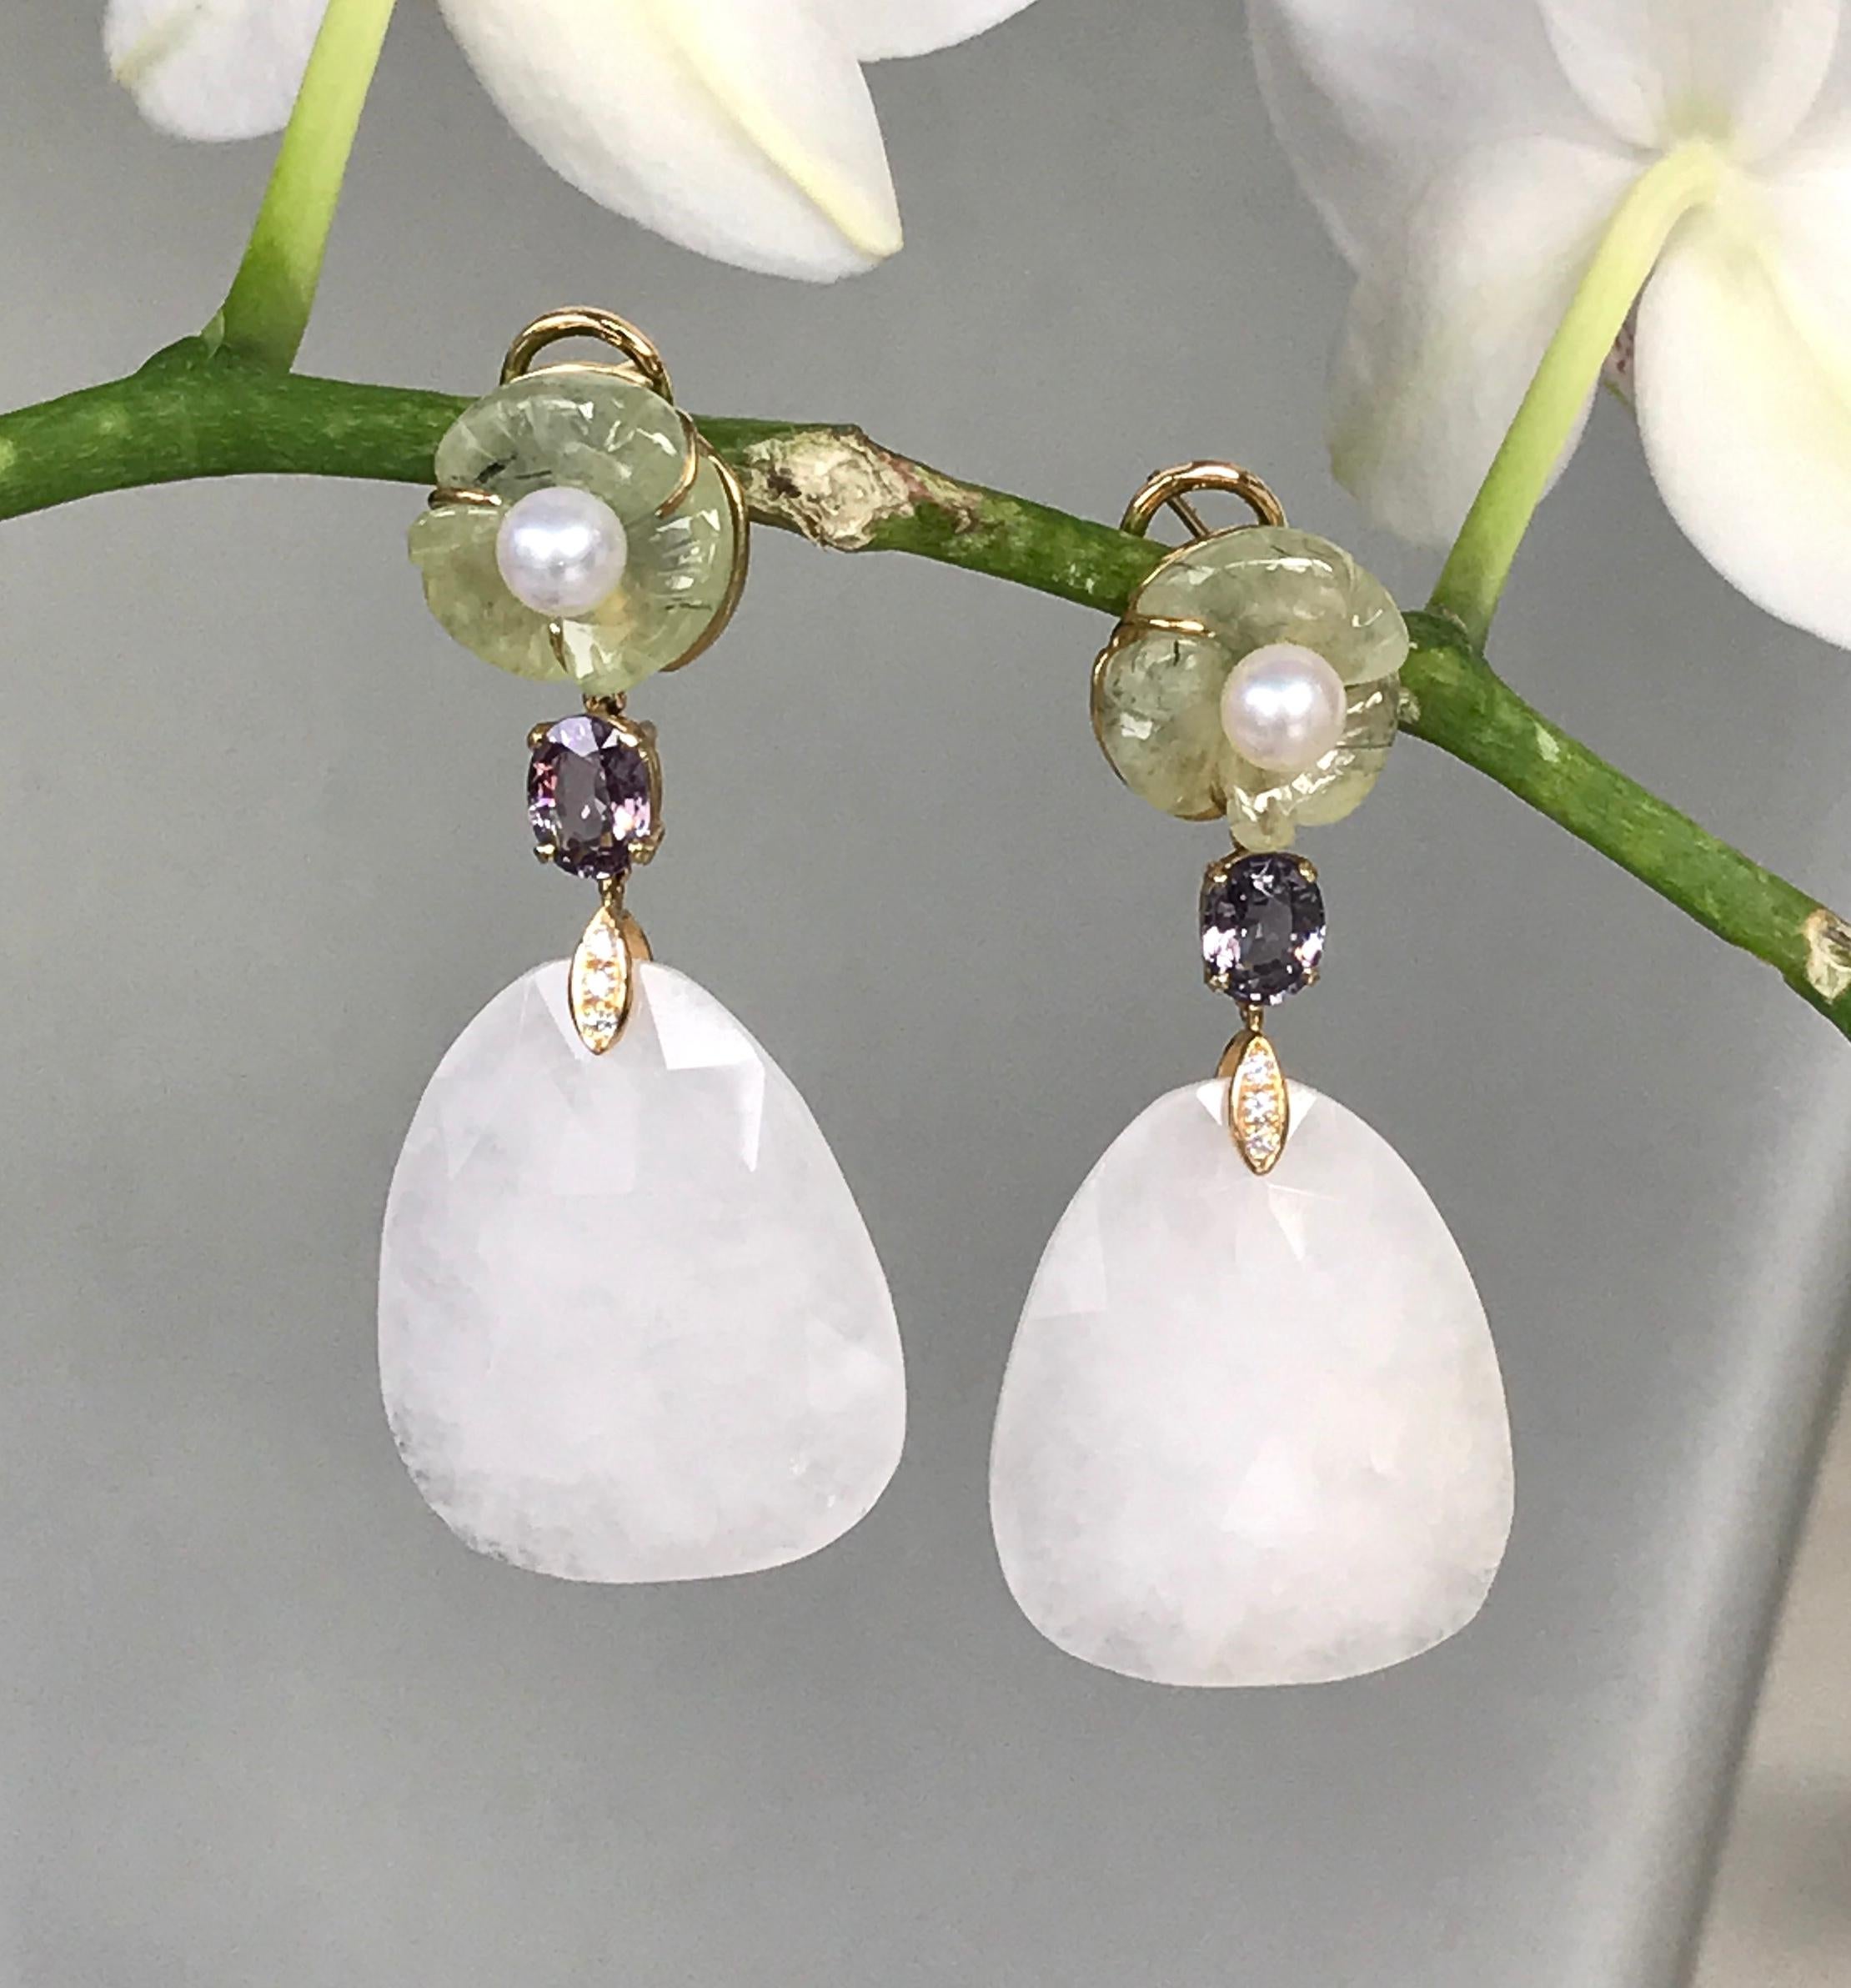 Spring is in full bloom with these beautiful Joon Han drop dangle earrings of carved prehnite flowers, Akoya pearls, spinels, white agates, and diamonds handcrafted in 18K yellow gold. The perfect jewelry for a pretty addition to your spring style!